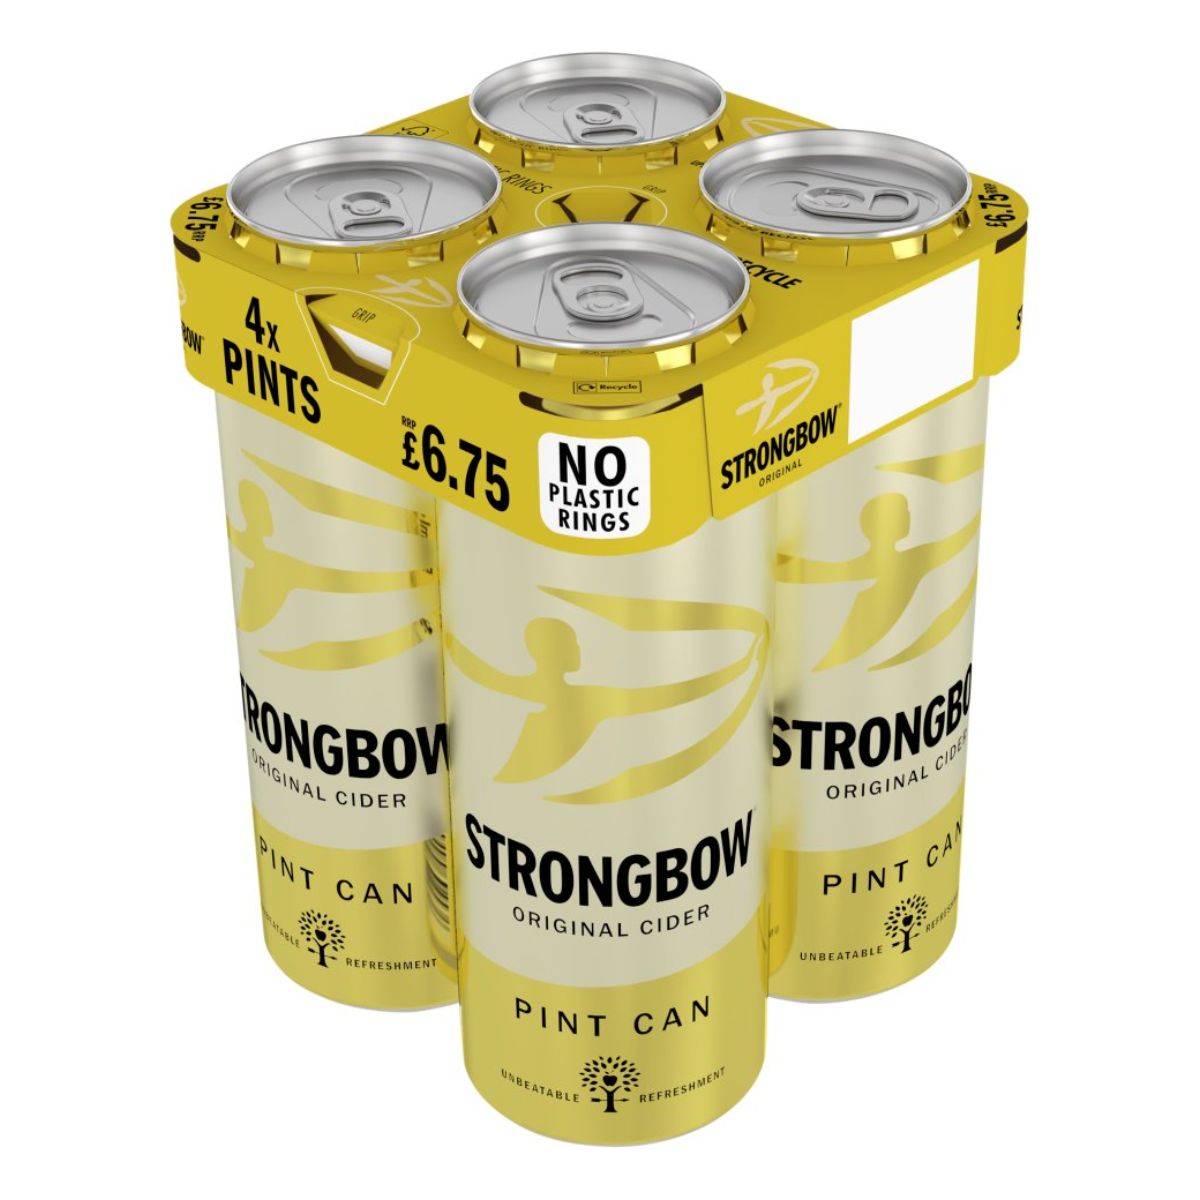 A pack of Strongbow - Original Cider Can (4.5% ABV) - 4 x 568ml on a white background.